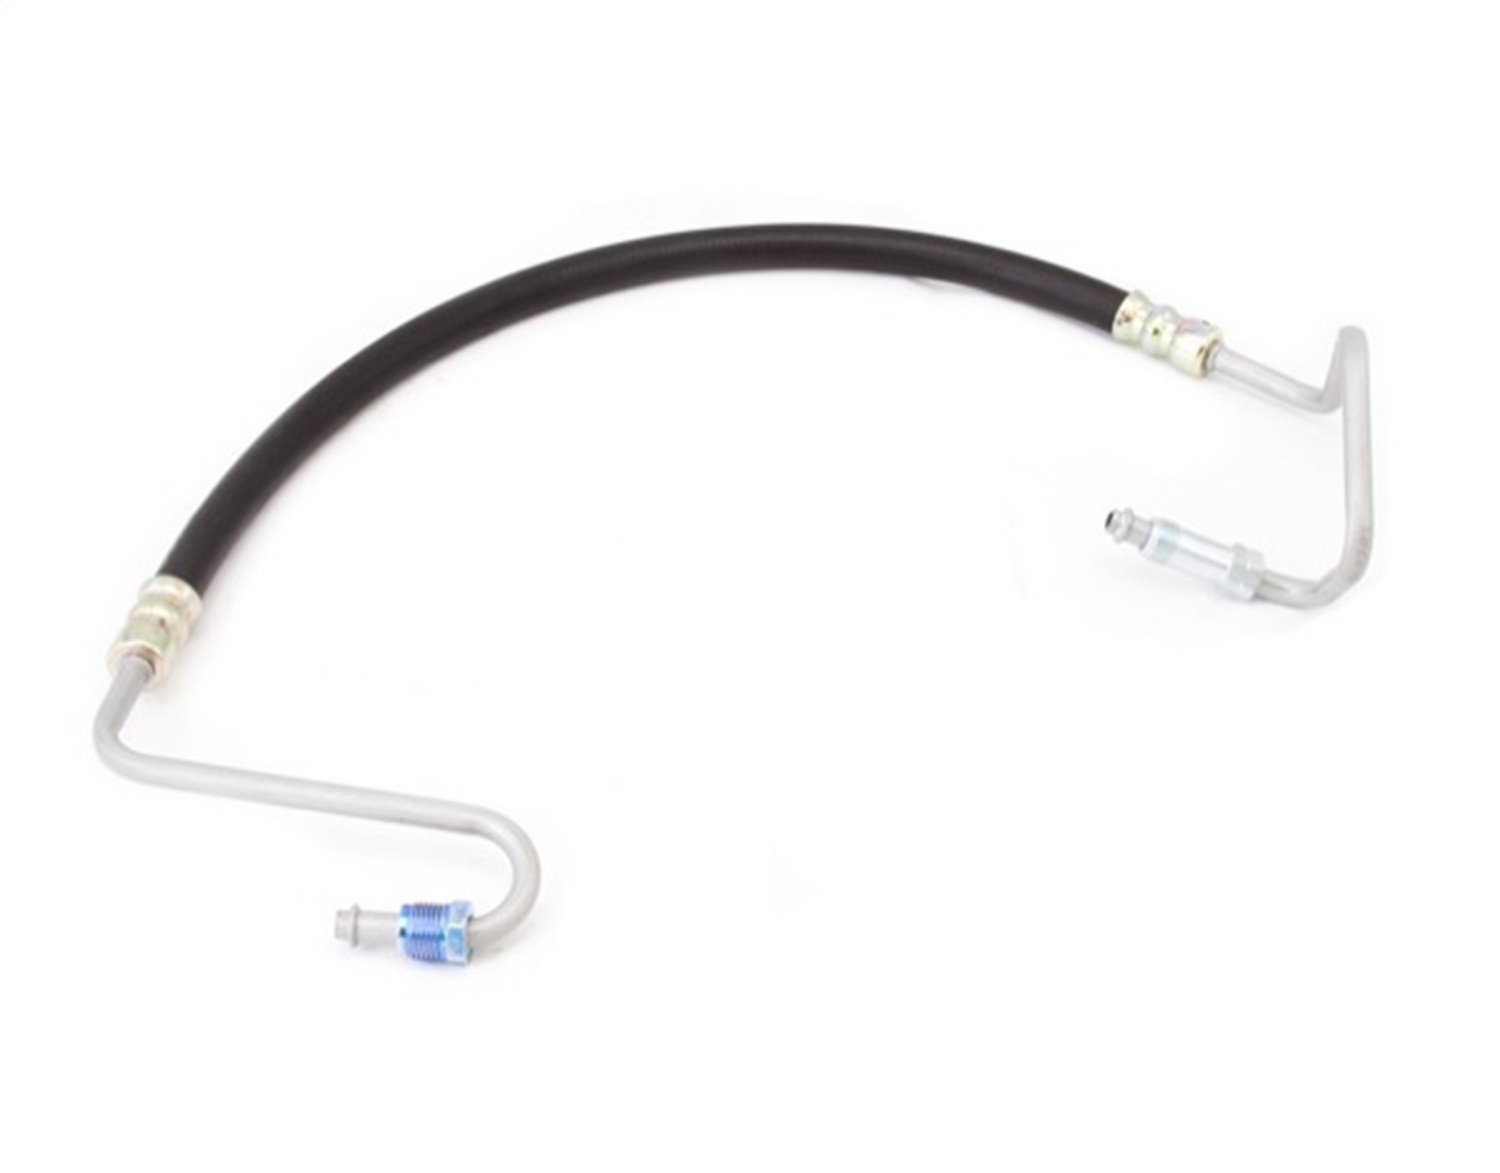 This power steering pressure hose from Omix-ADA fits 97-02 Jeep Wrangler TJ with a 4.0L engine.